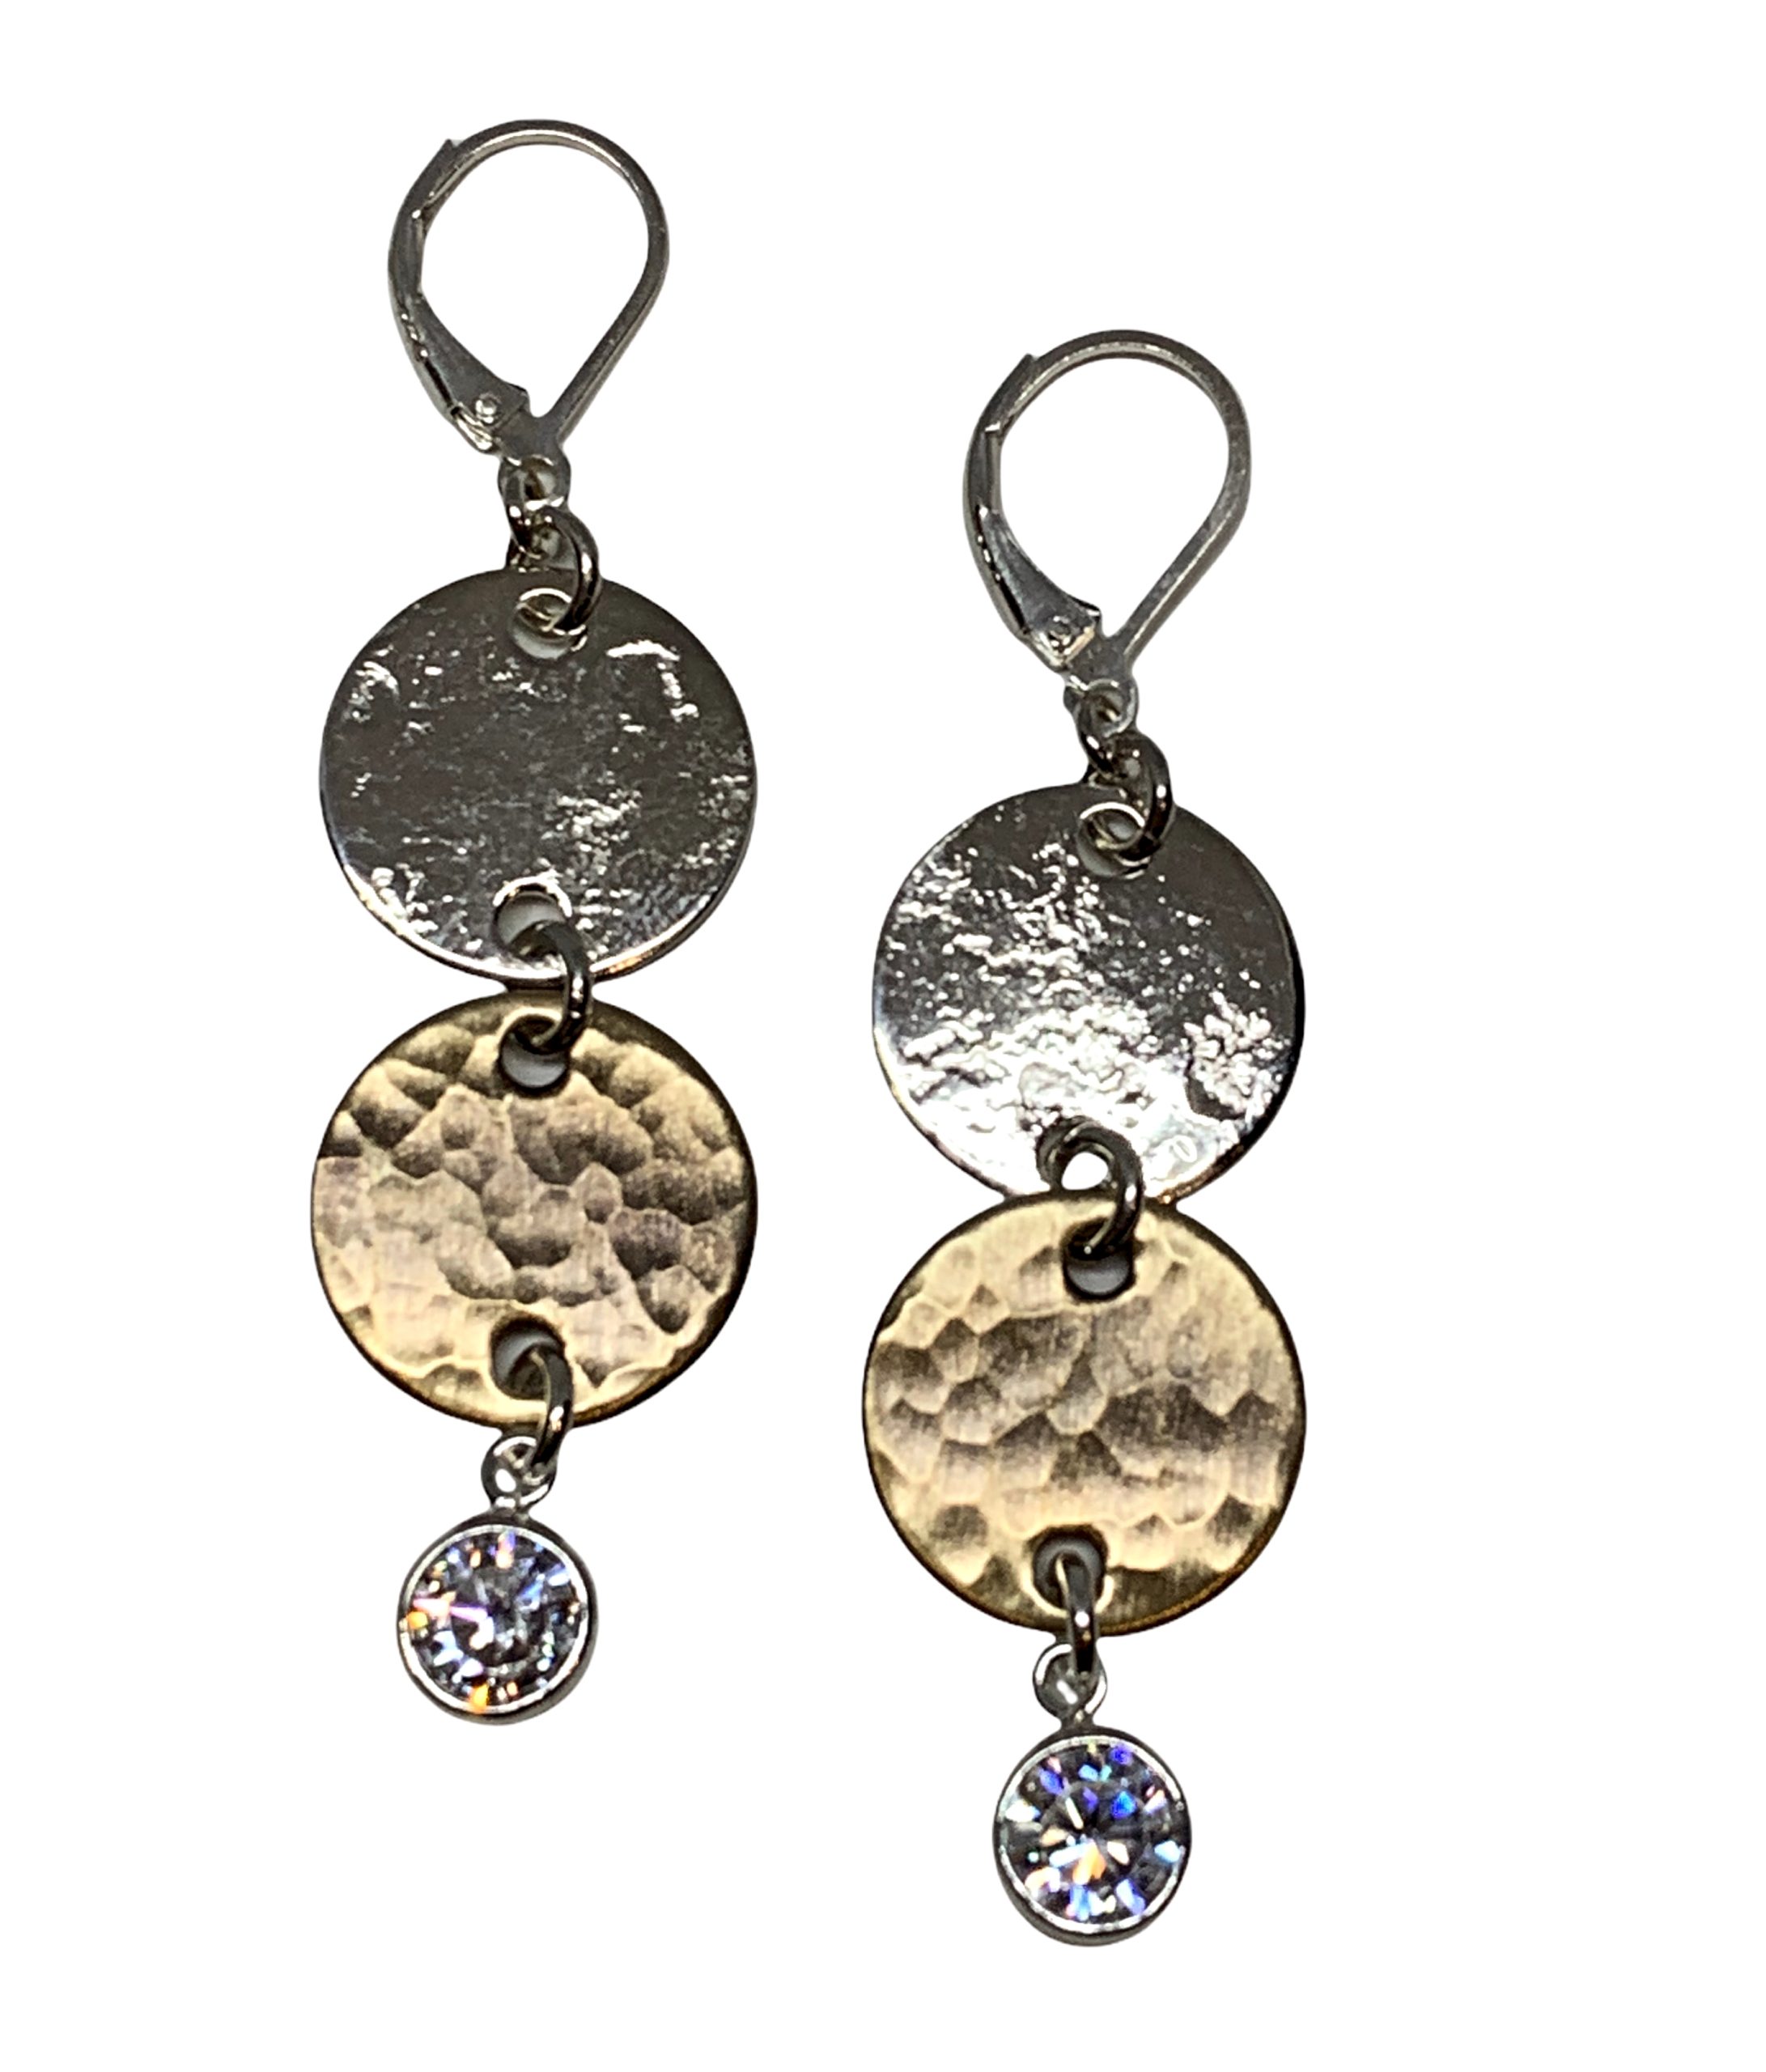 Sterling silver, bronze, and CZ earrings by Karyn Chopik | Effusion Art Gallery + Cast Glass Studio, Invermere BC